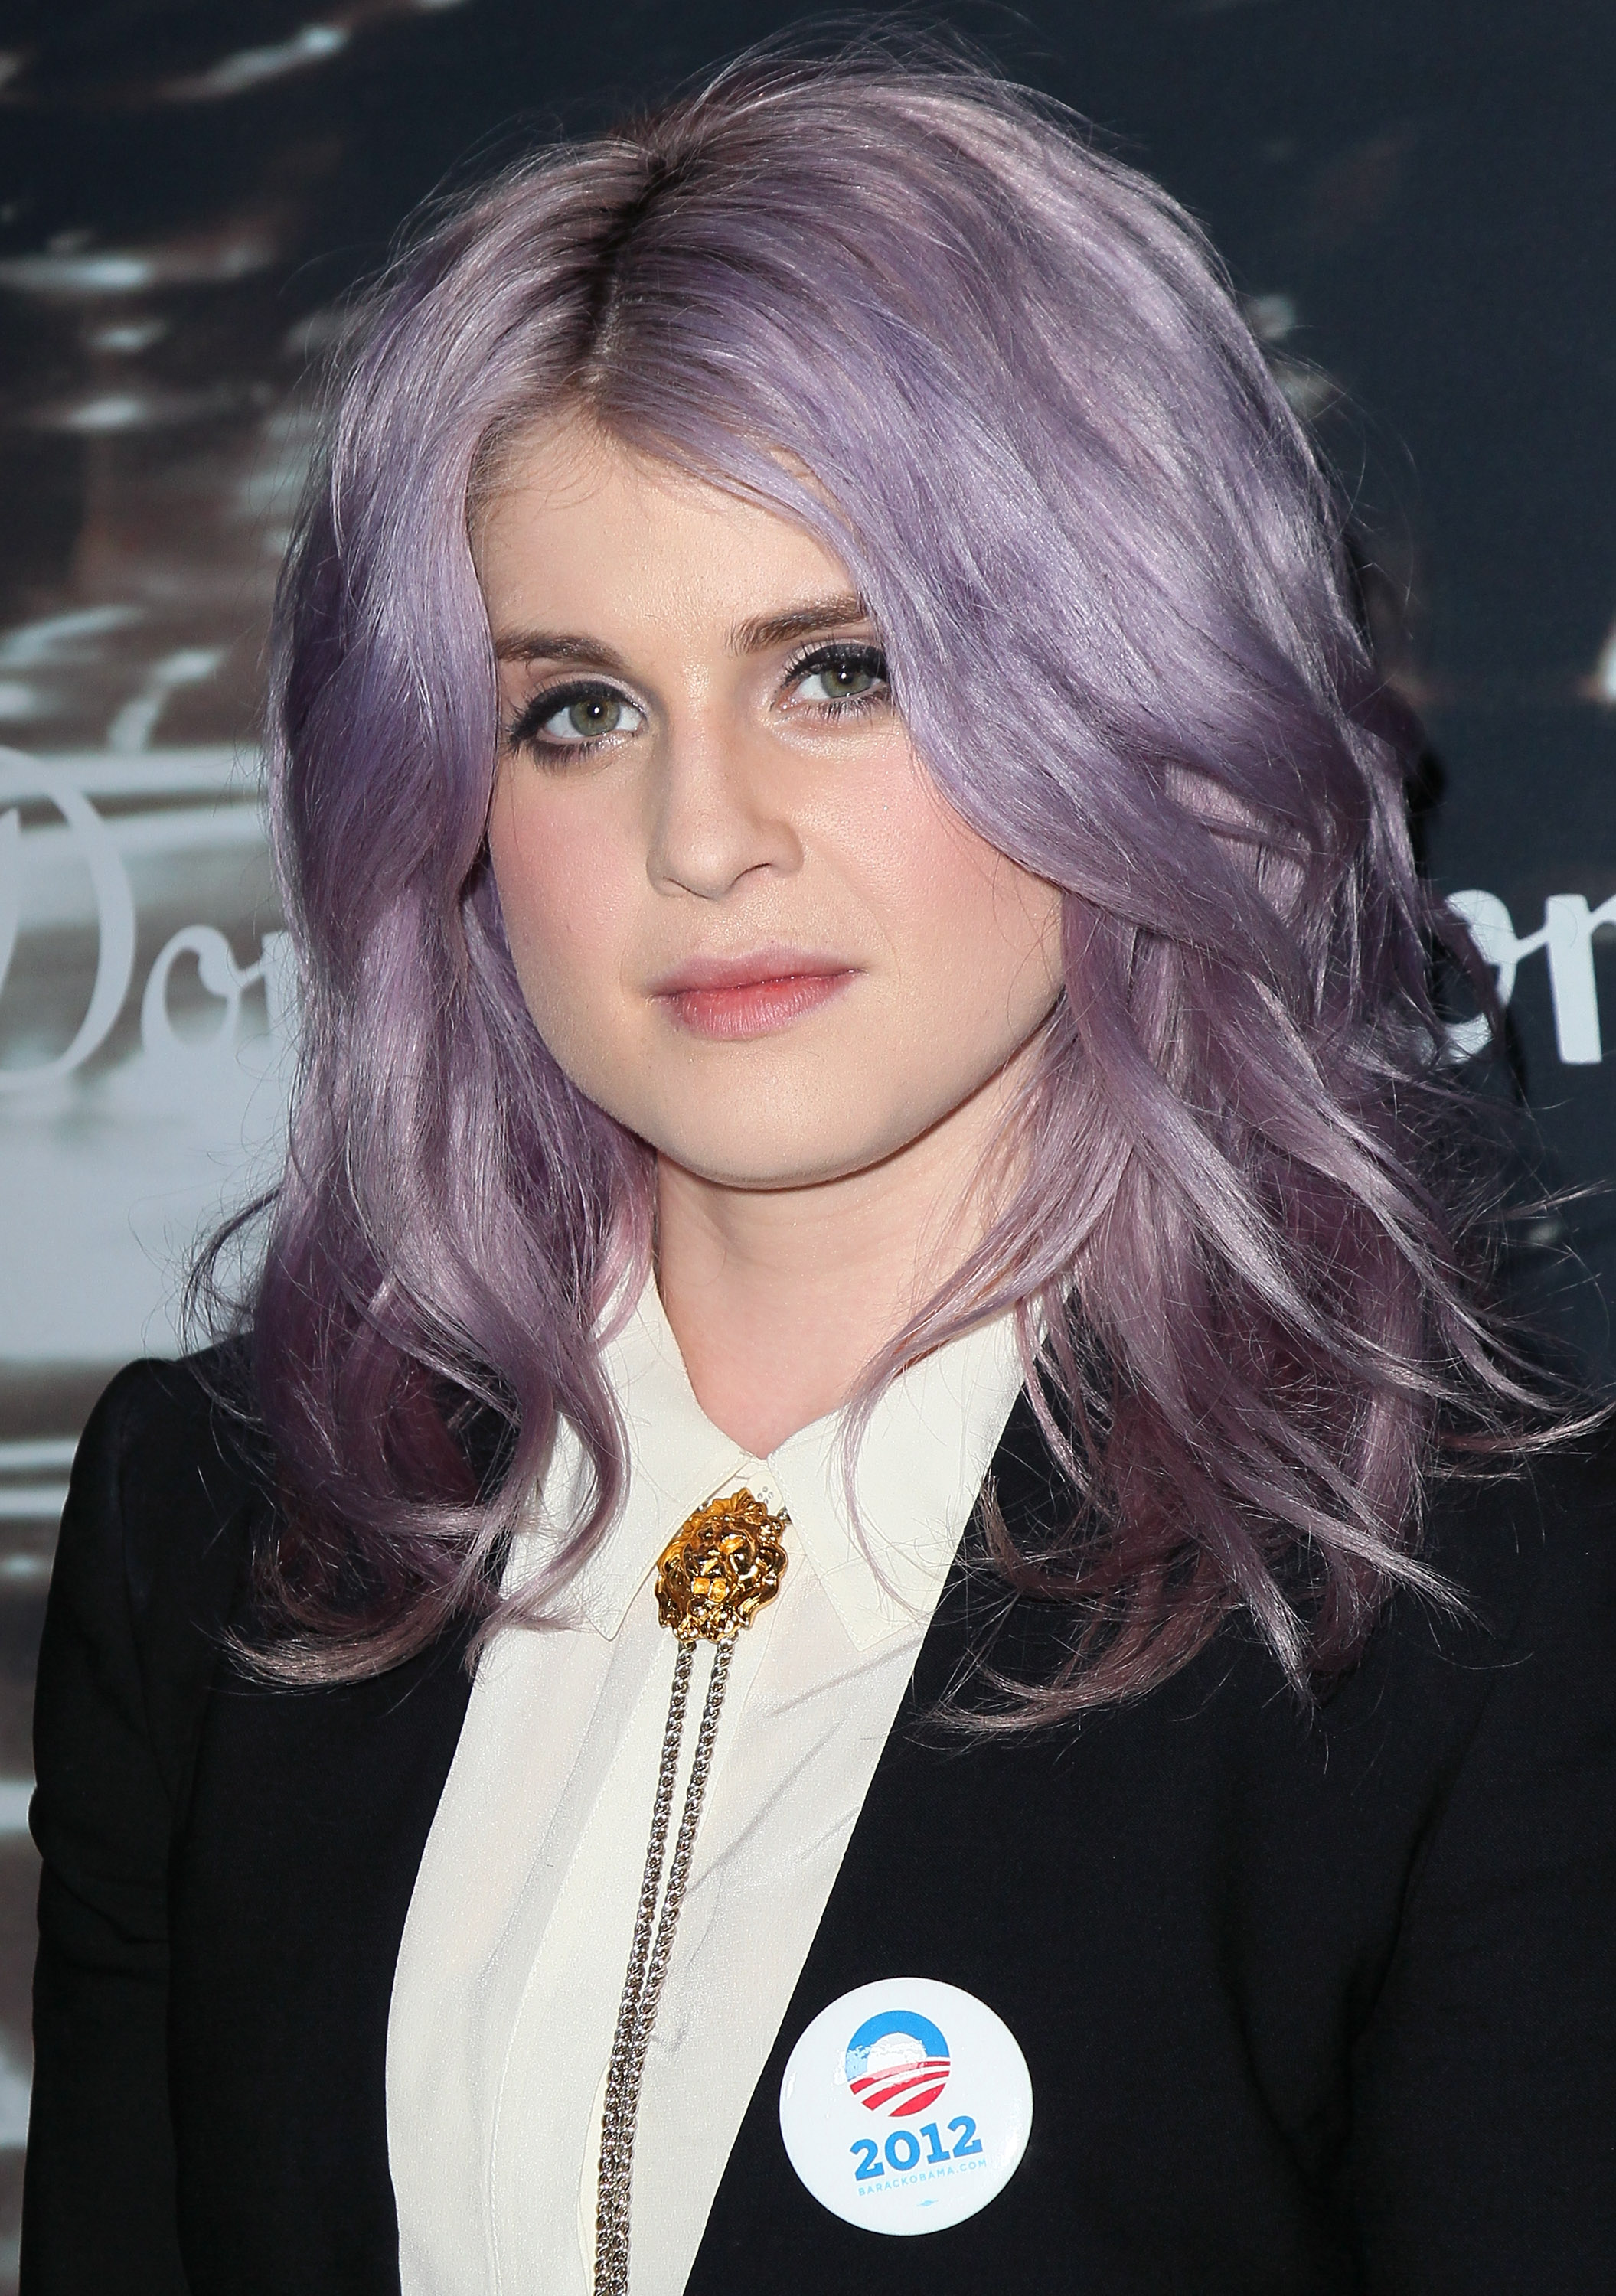 Kelly Osbourne attends David Lynch unveiling his limited edition bottle design for the Dom Perignon 2003 on June 20, 2012 in Los Angeles, California. | Source: Getty Images